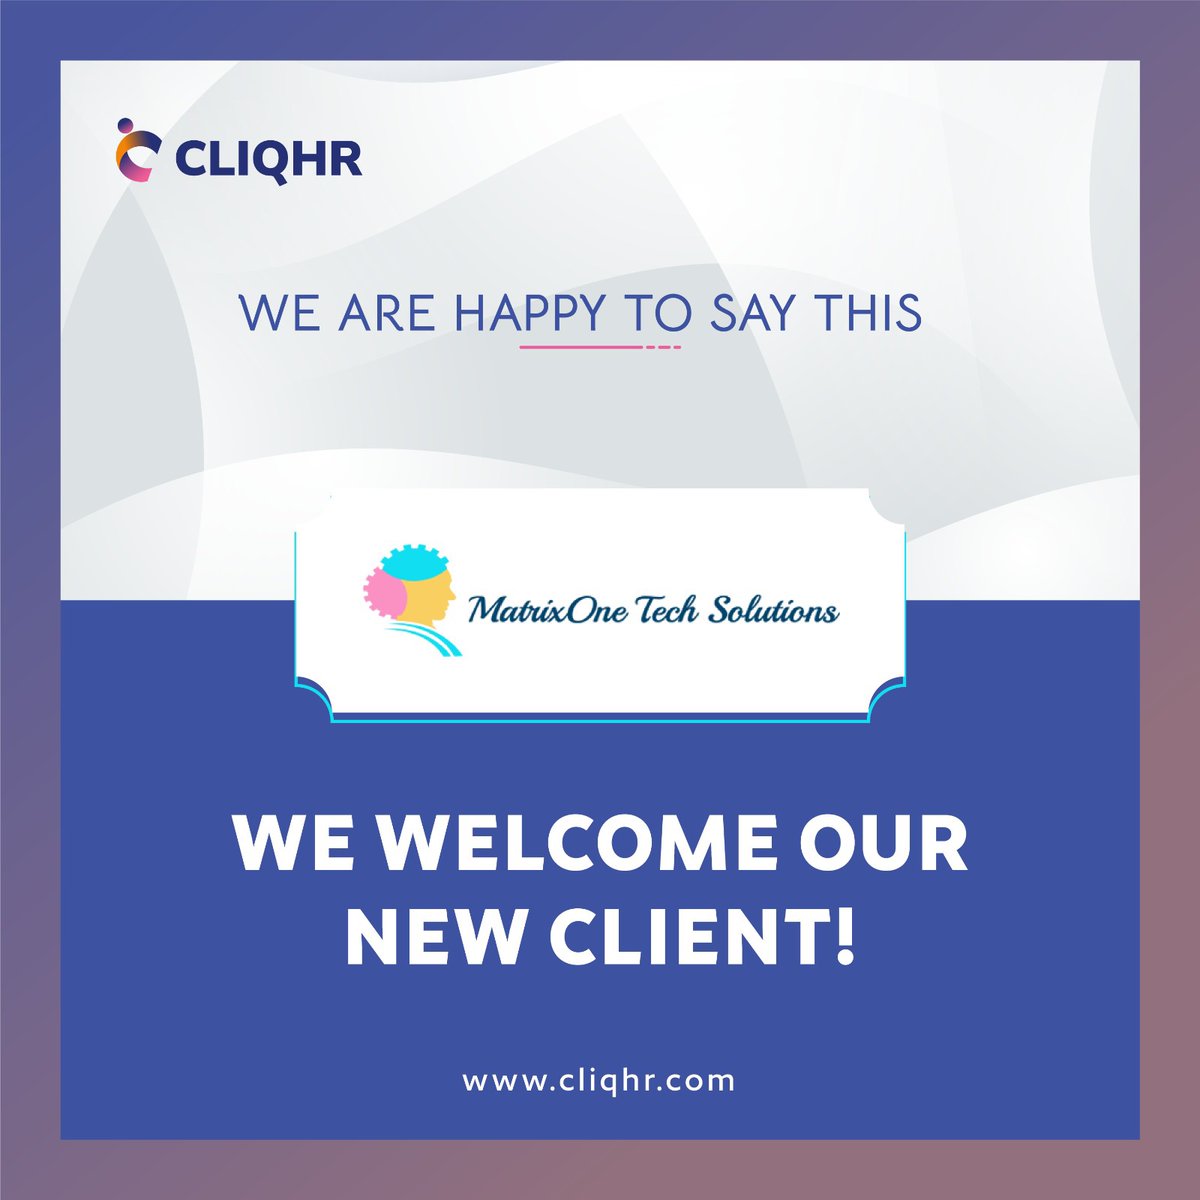 We welcome our new client MatrixOne Tech Solutions.

Thank you for choosing us as your recruitment partner, looking forward to a long and successful collaboration.

#recruitmentpartner #hrconsultant #recruitmentagency #recruitmentservices #recruitmentsolutions #cliqhr